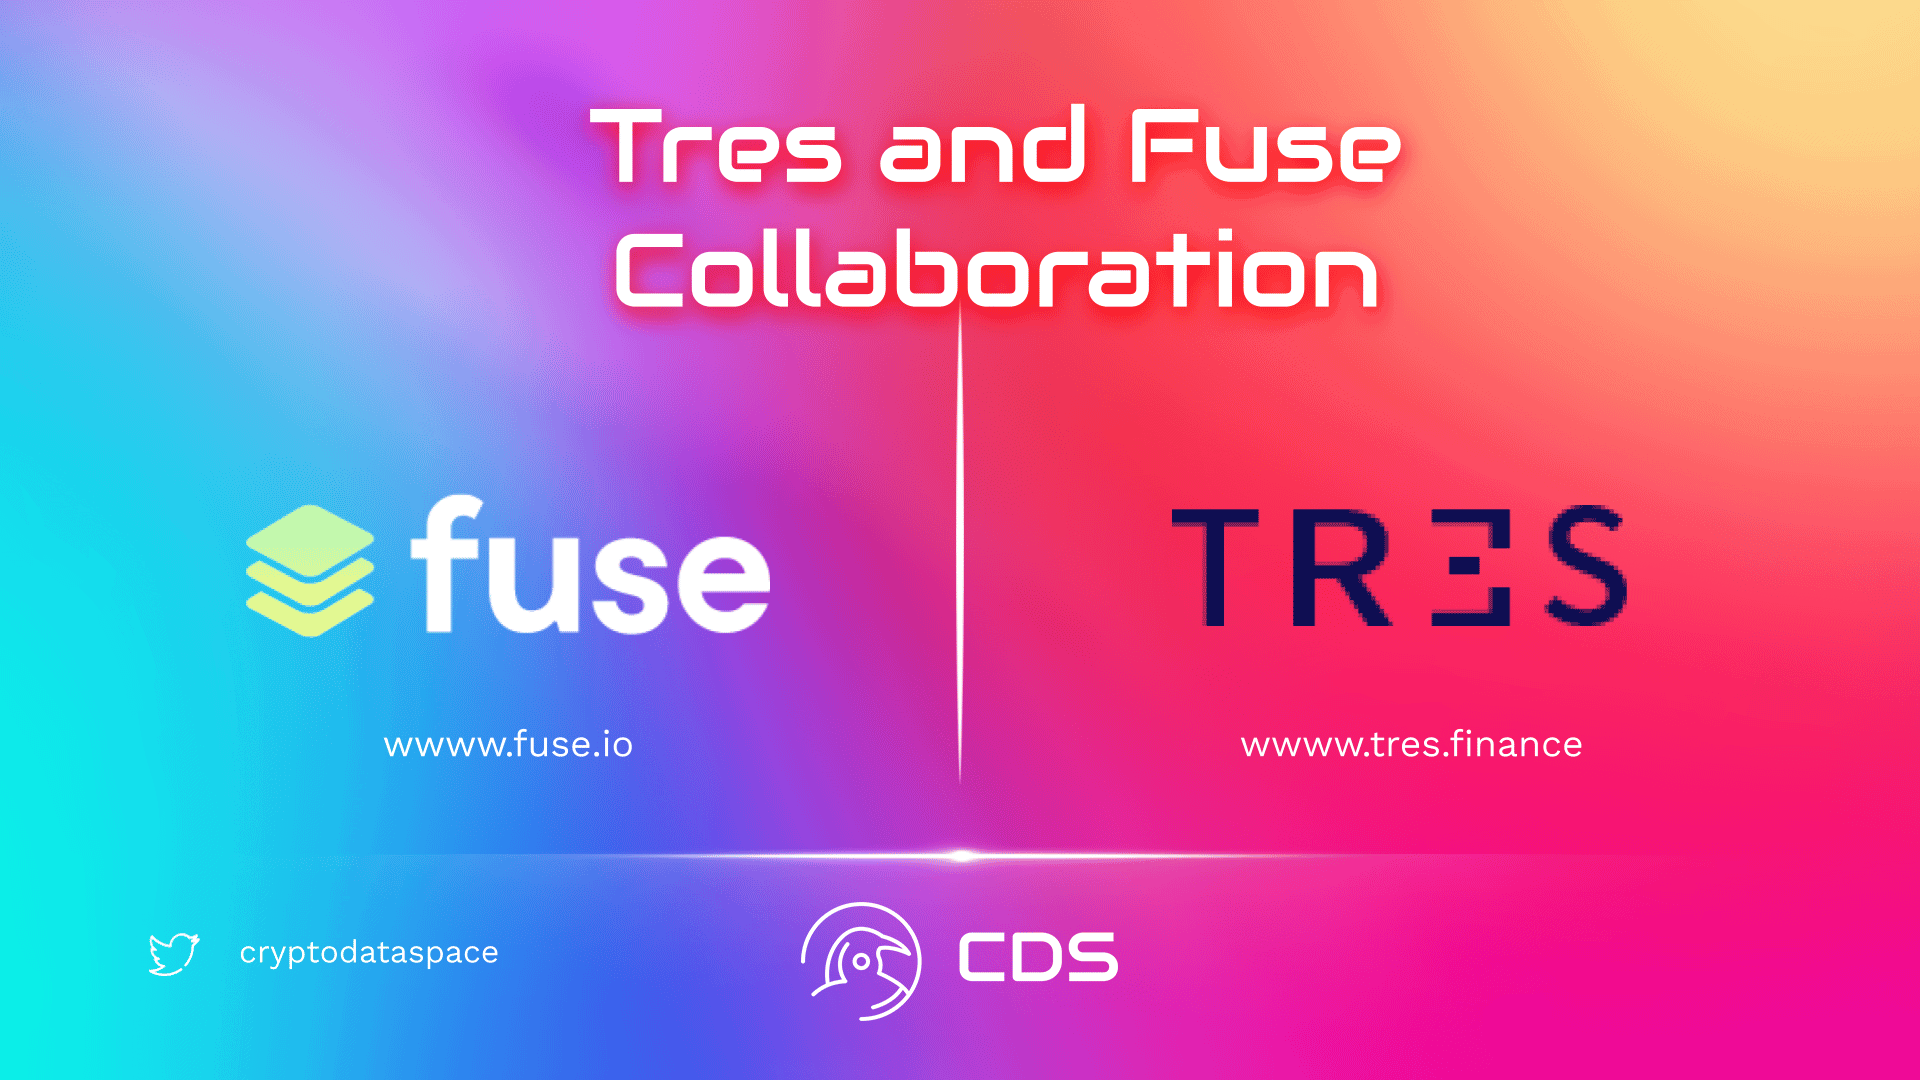 Tres and Fuse Collaboration